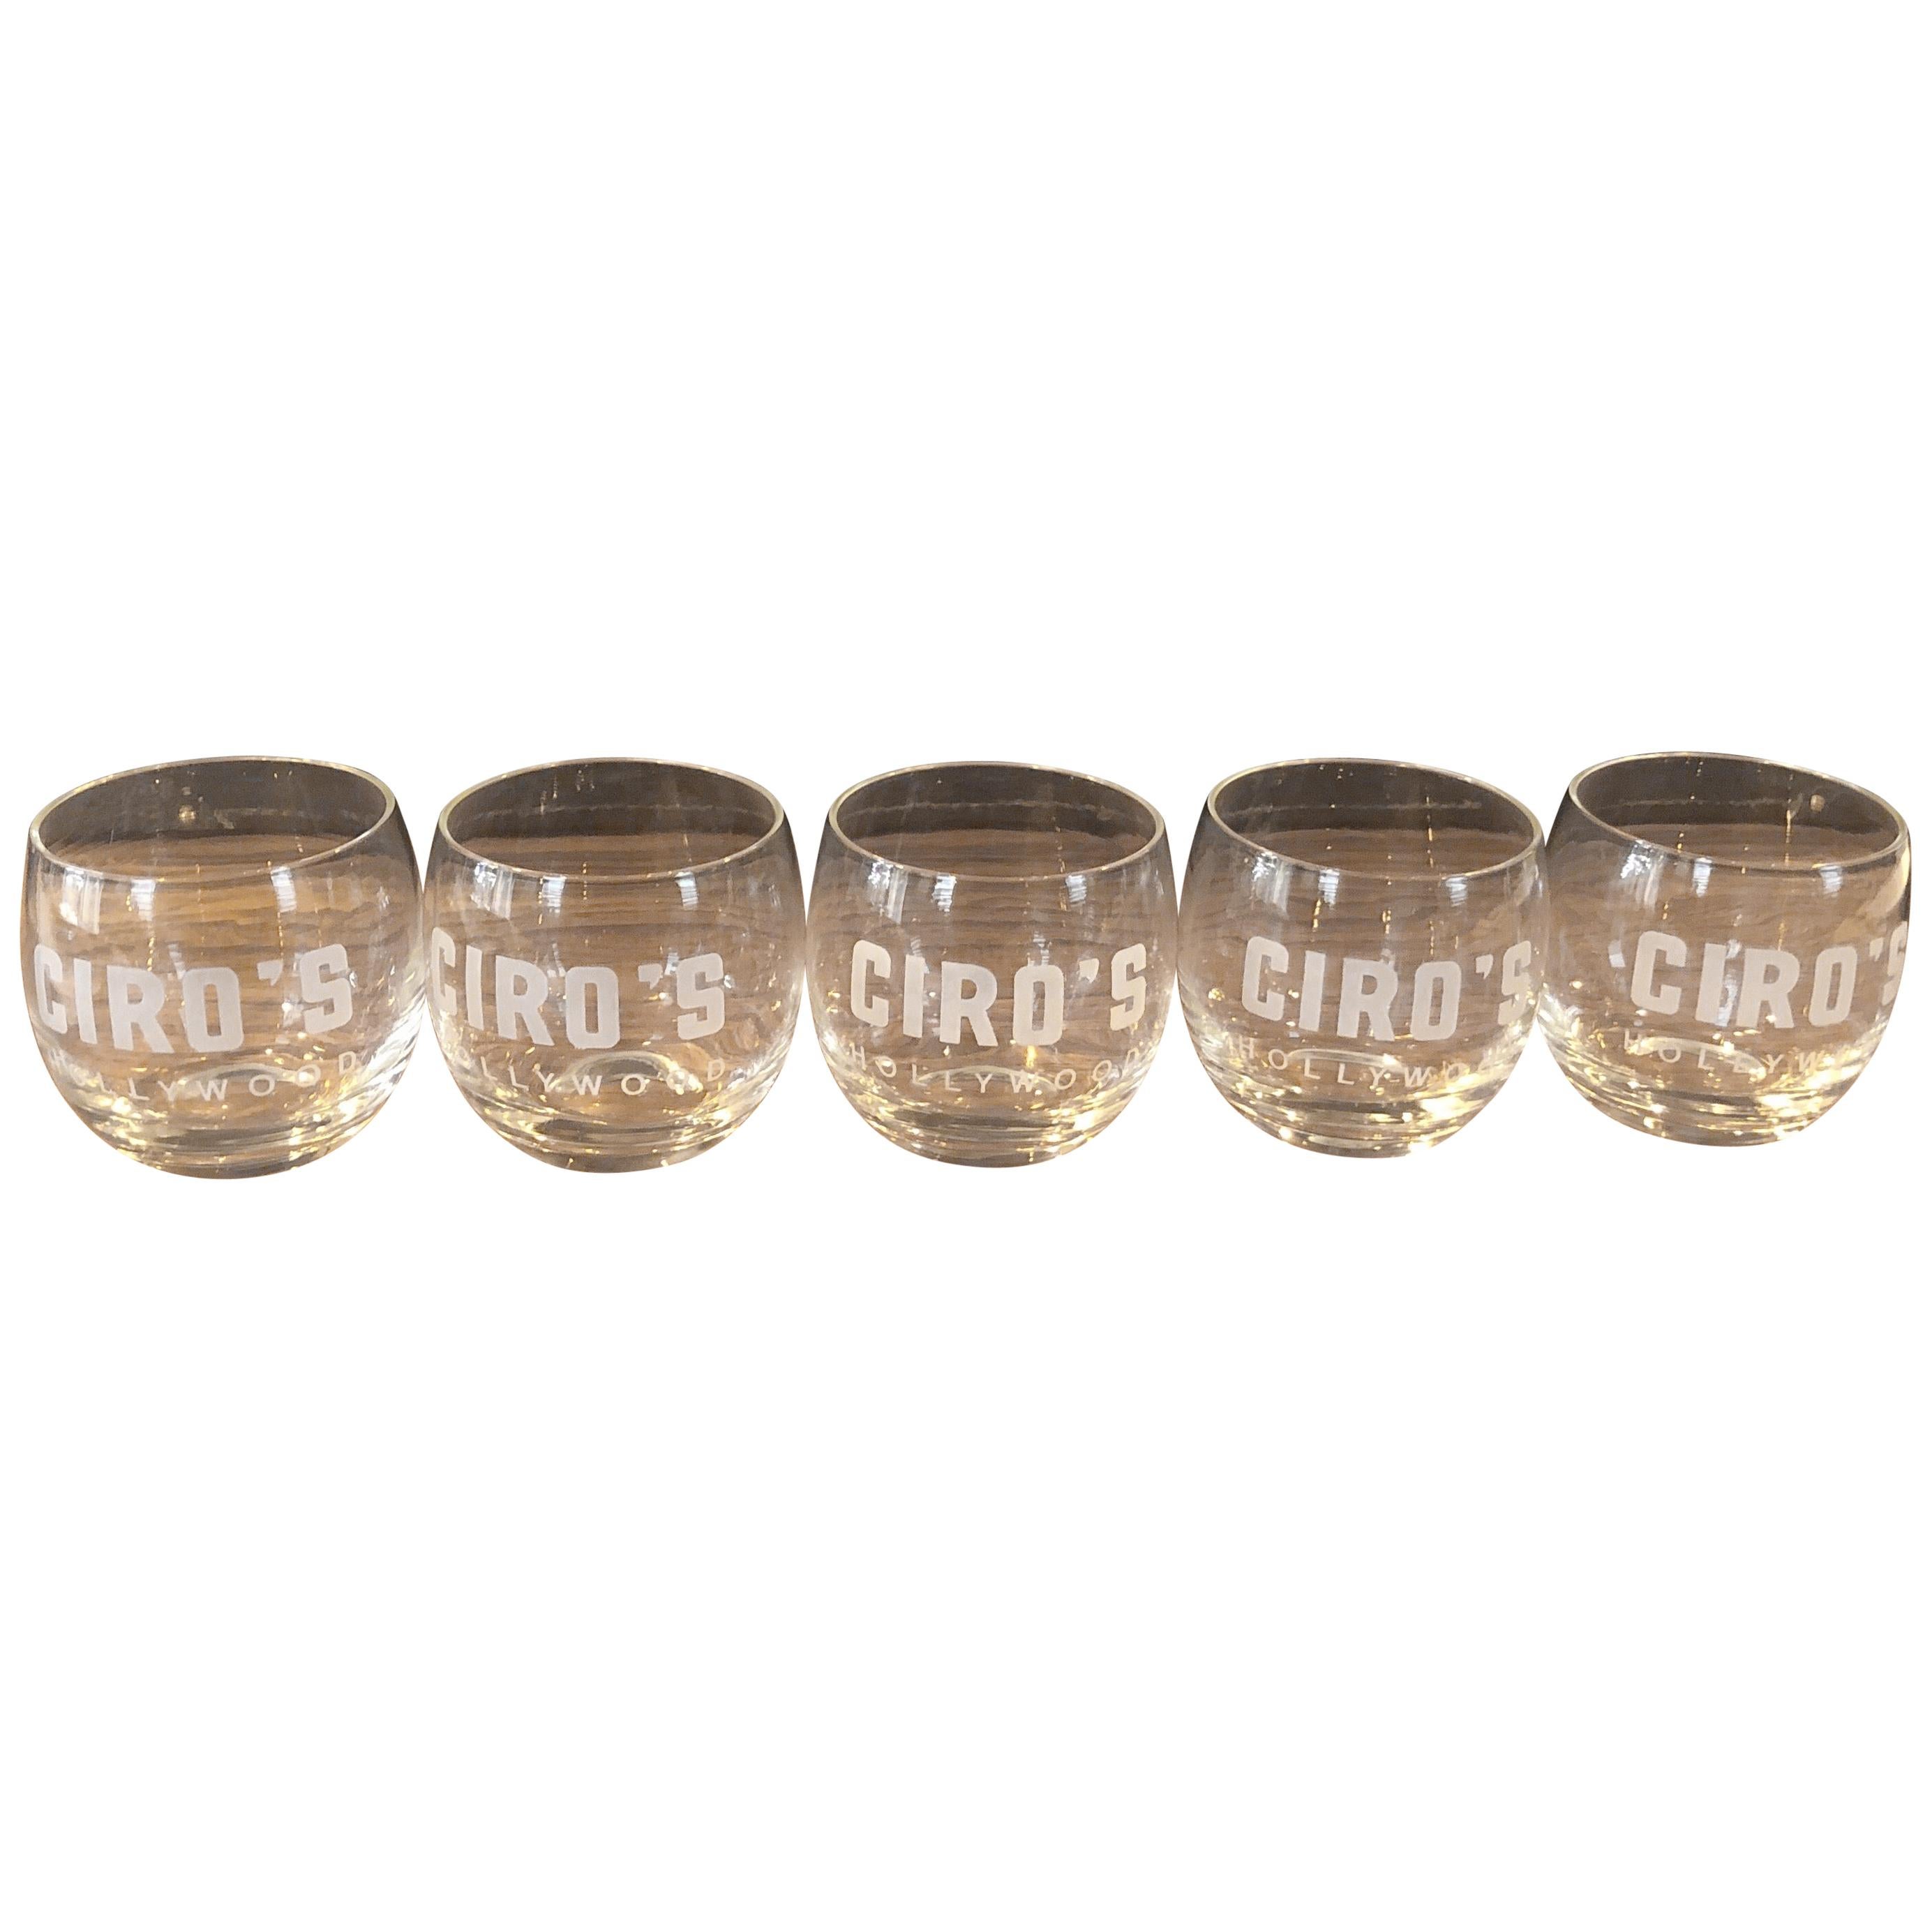 Set of Five Double Old Fashioned Glasses '12oz' from Ciro's Hollywood Barware